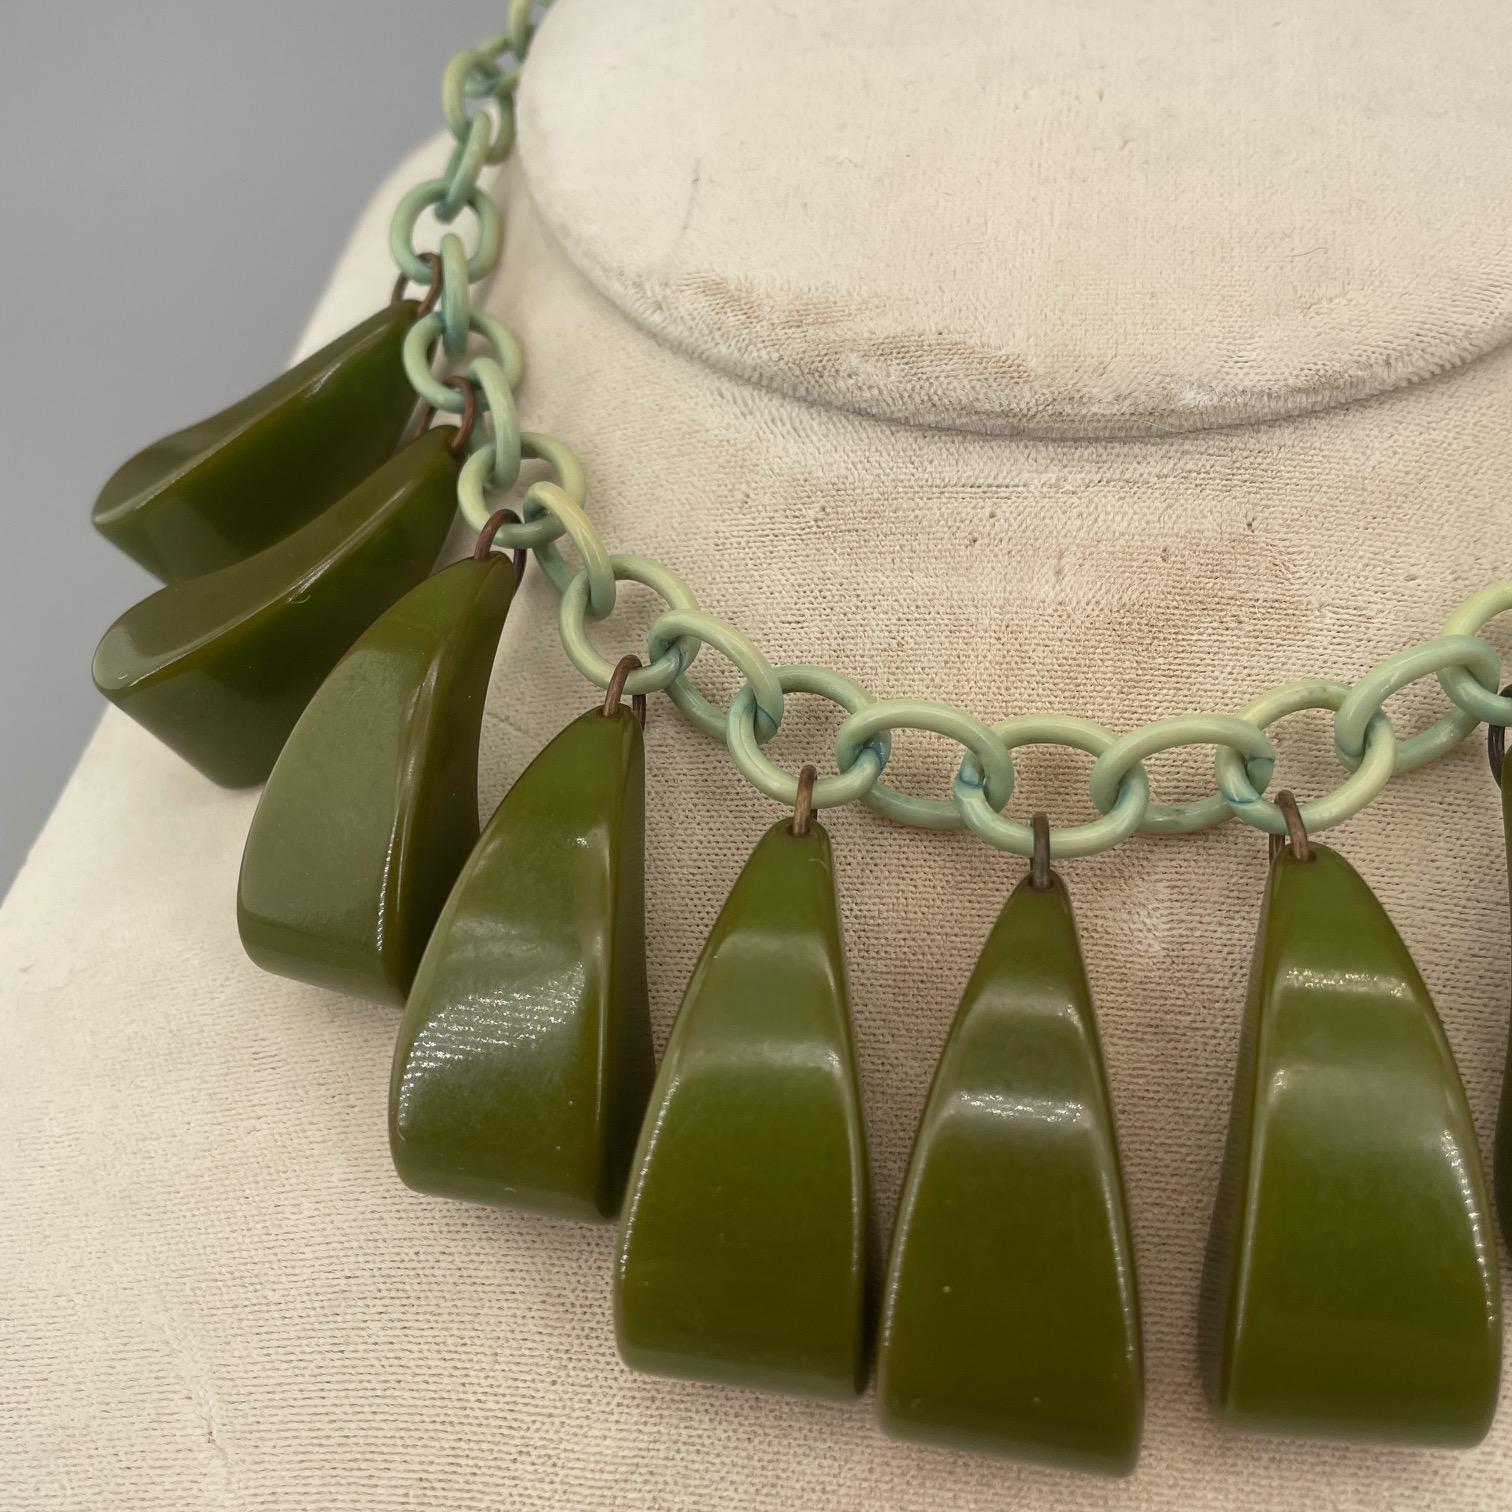 1930s Art Deco Bakelite + Celluloid Linked Necklace Dark Green Arching Dangles In Good Condition For Sale In Hyattsville, MD